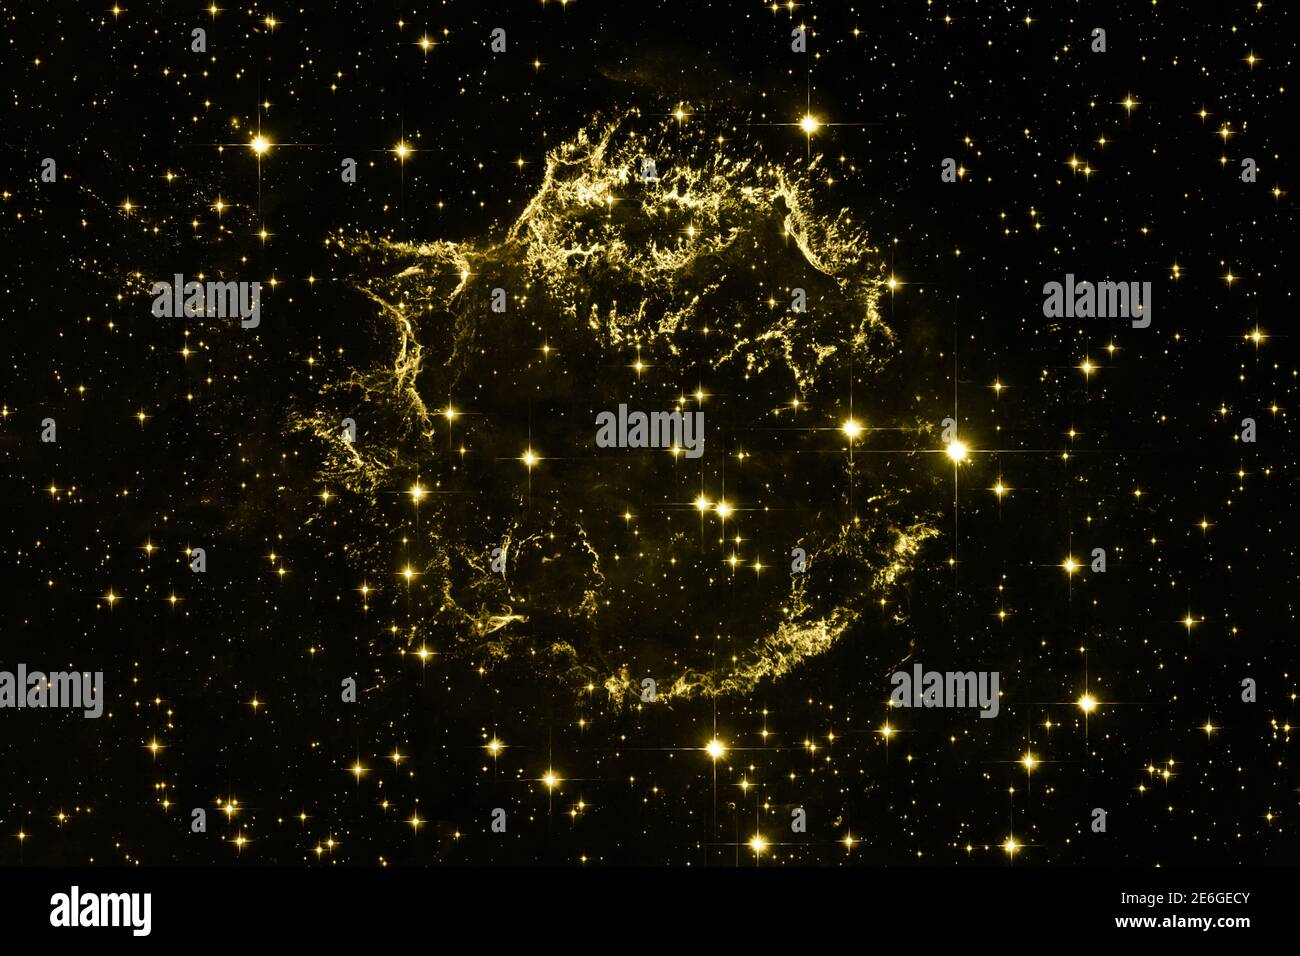 Supernova Core pulsar neutron star. Remains of a supernova explosion. Elements of this image furnished by NASA. Retouched image. Stock Photo